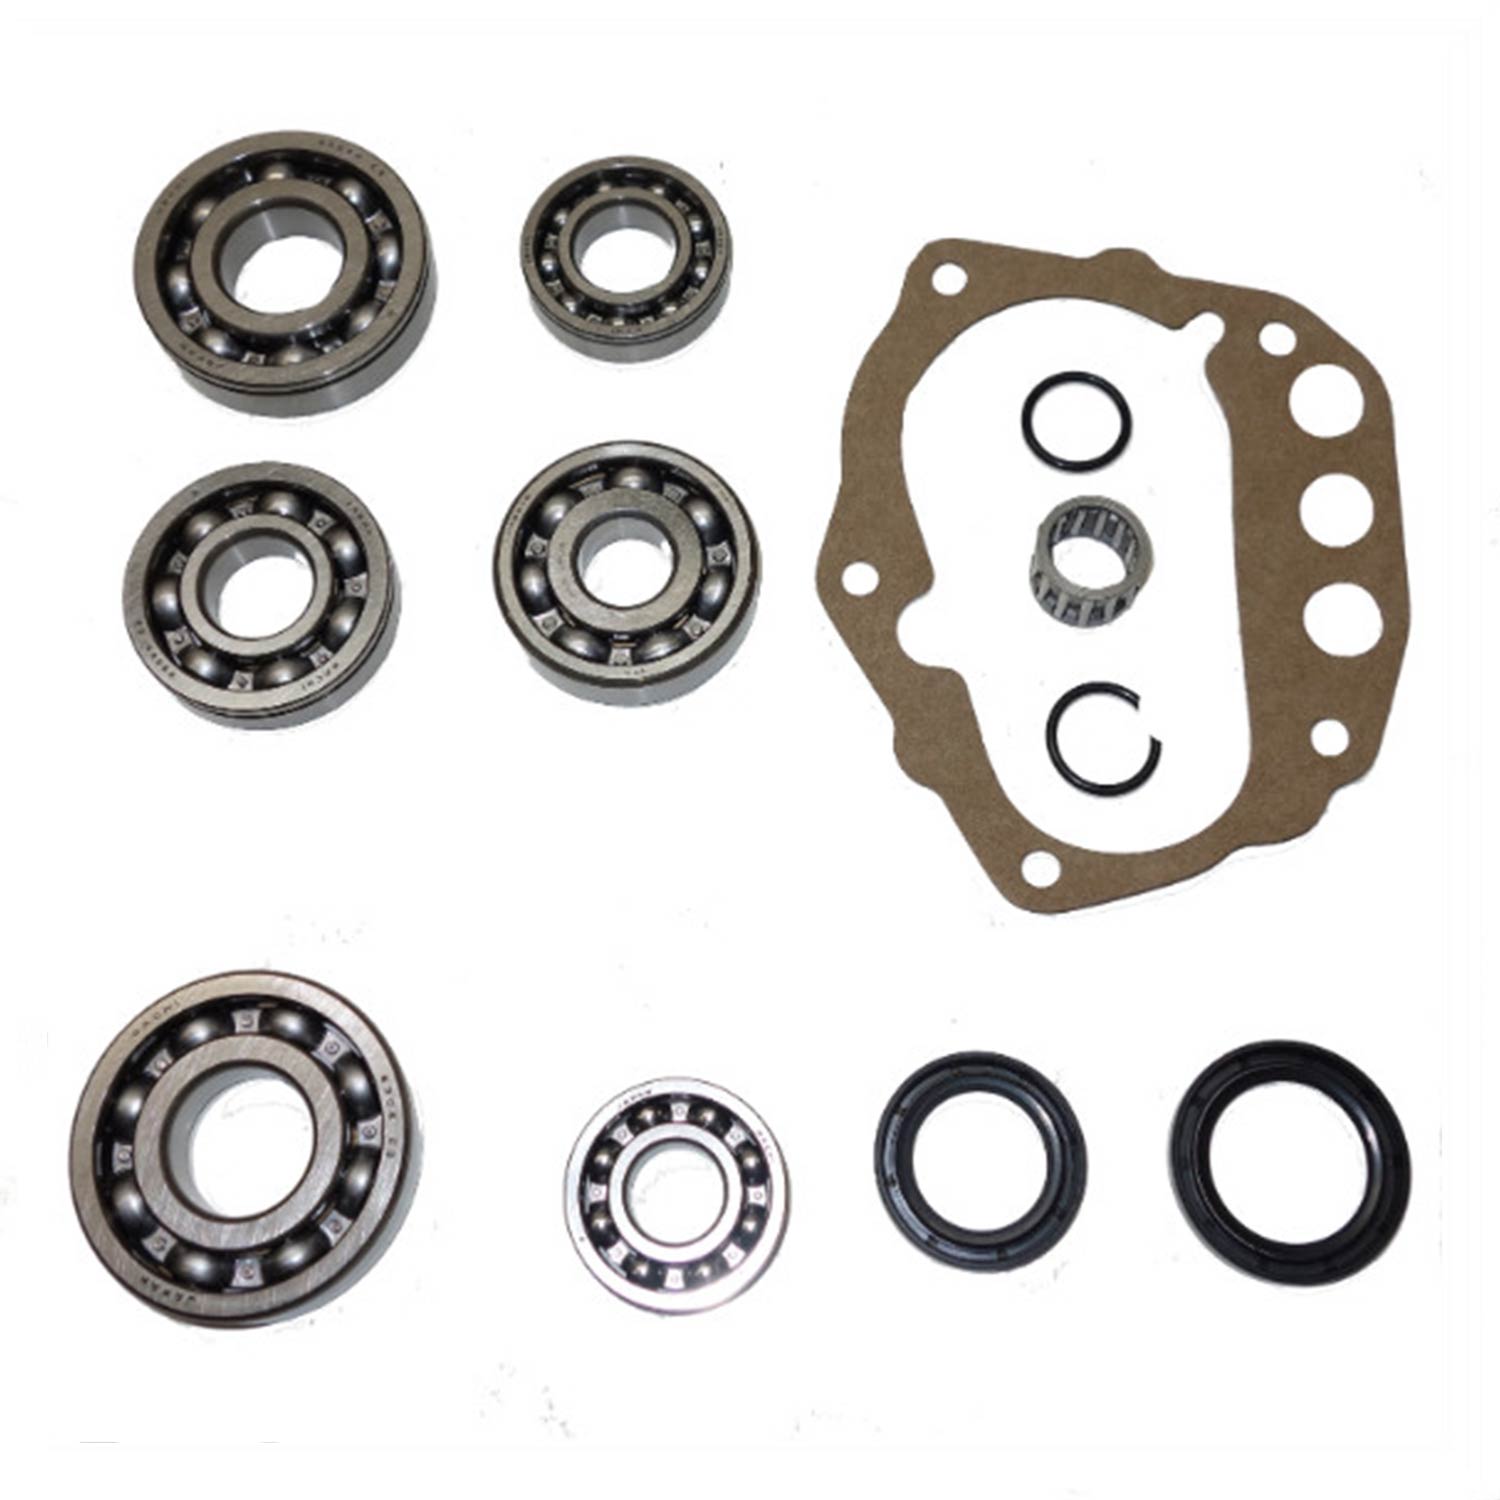 USA Standard 71822 Manual Transmission Bearing Kit, 1998+ Nissan Frontier 4-Cyl 2Wd